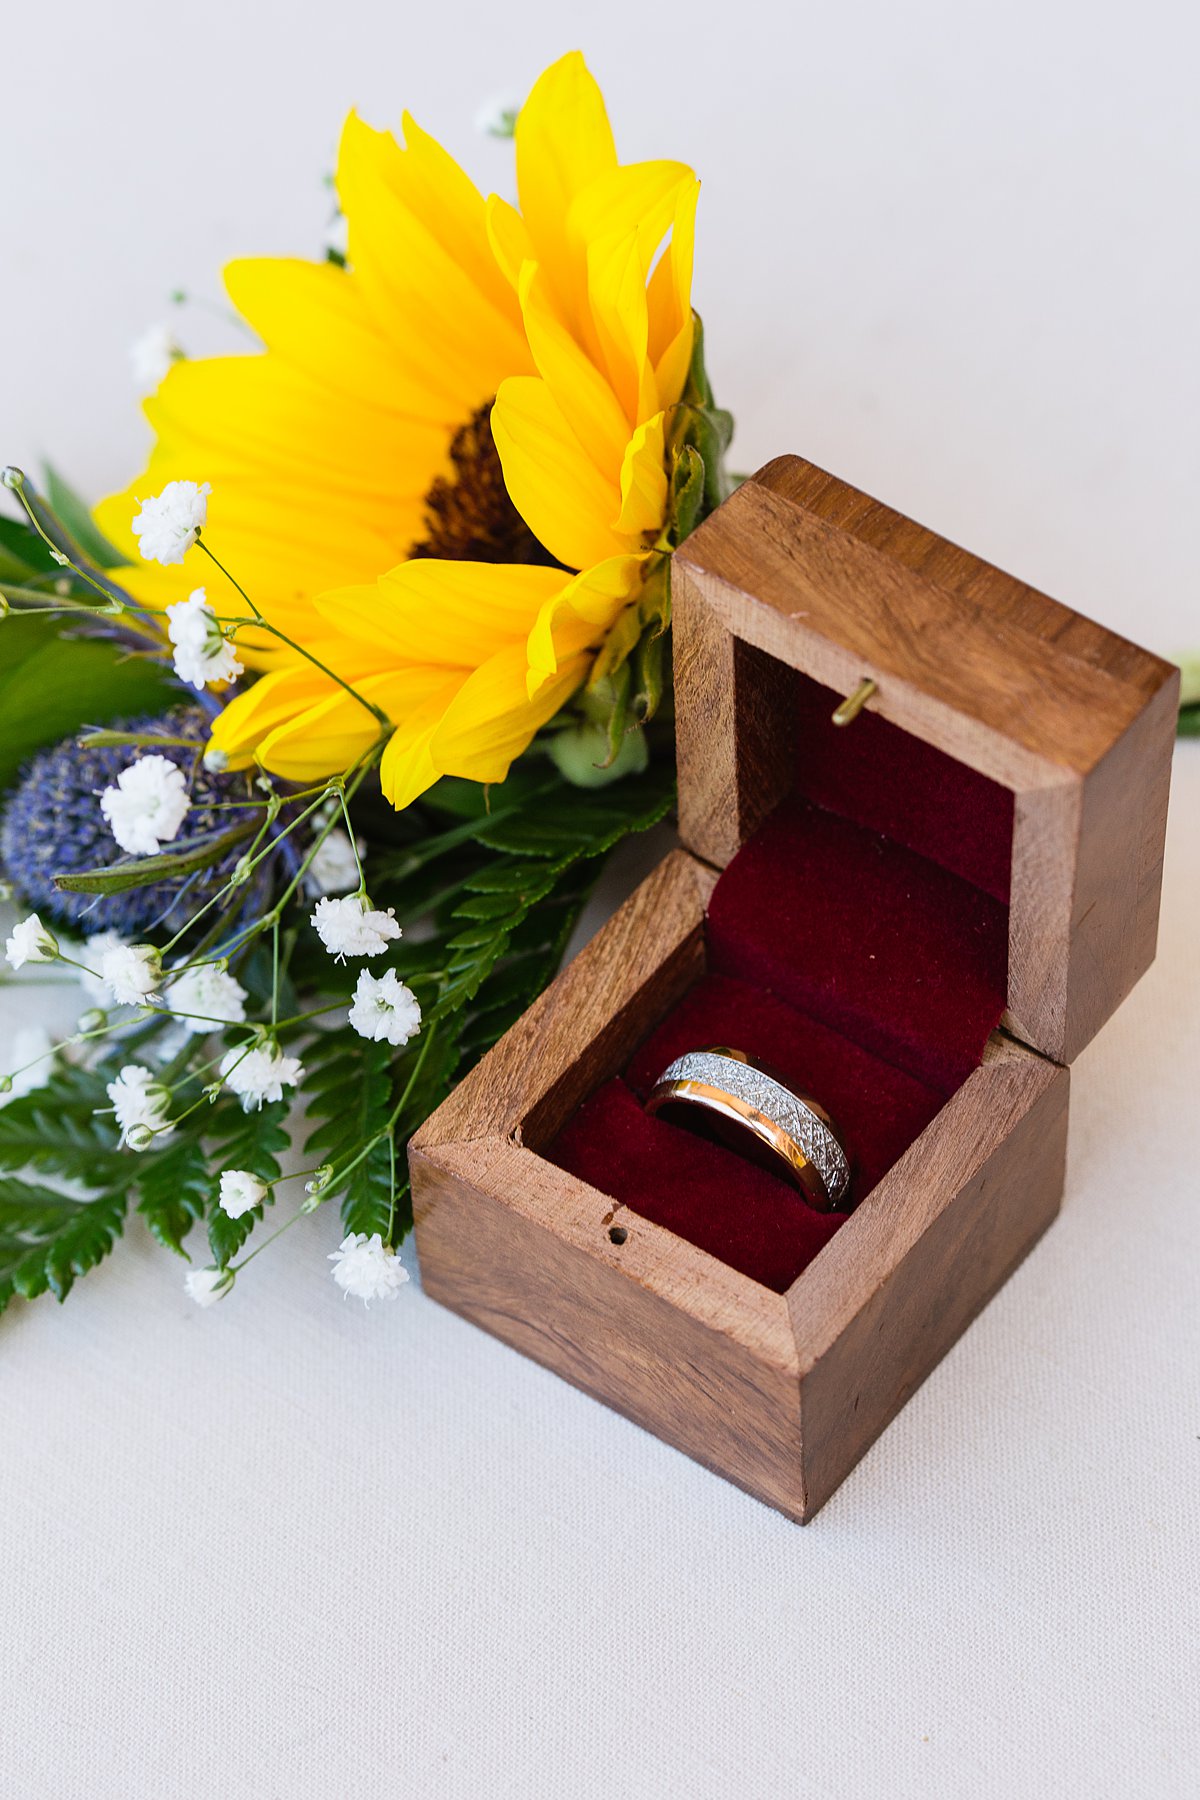 Unique gold wedding band in wooden box with sunflower boutonniere by PMA Photography.